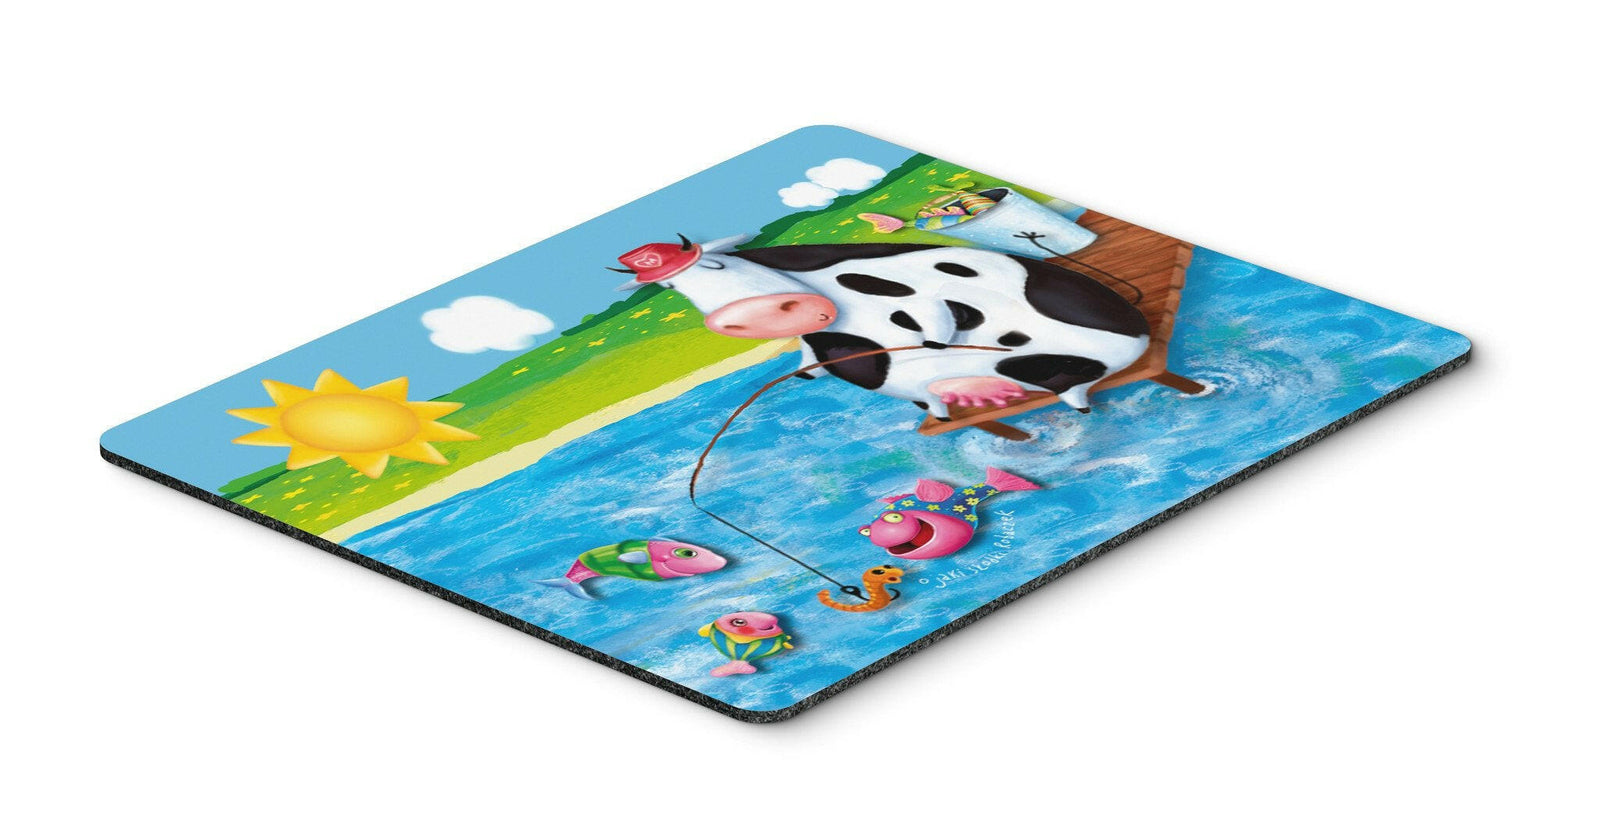 Cow Fishing off of a Pier Mouse Pad, Hot Pad or Trivet APH0085MP by Caroline's Treasures